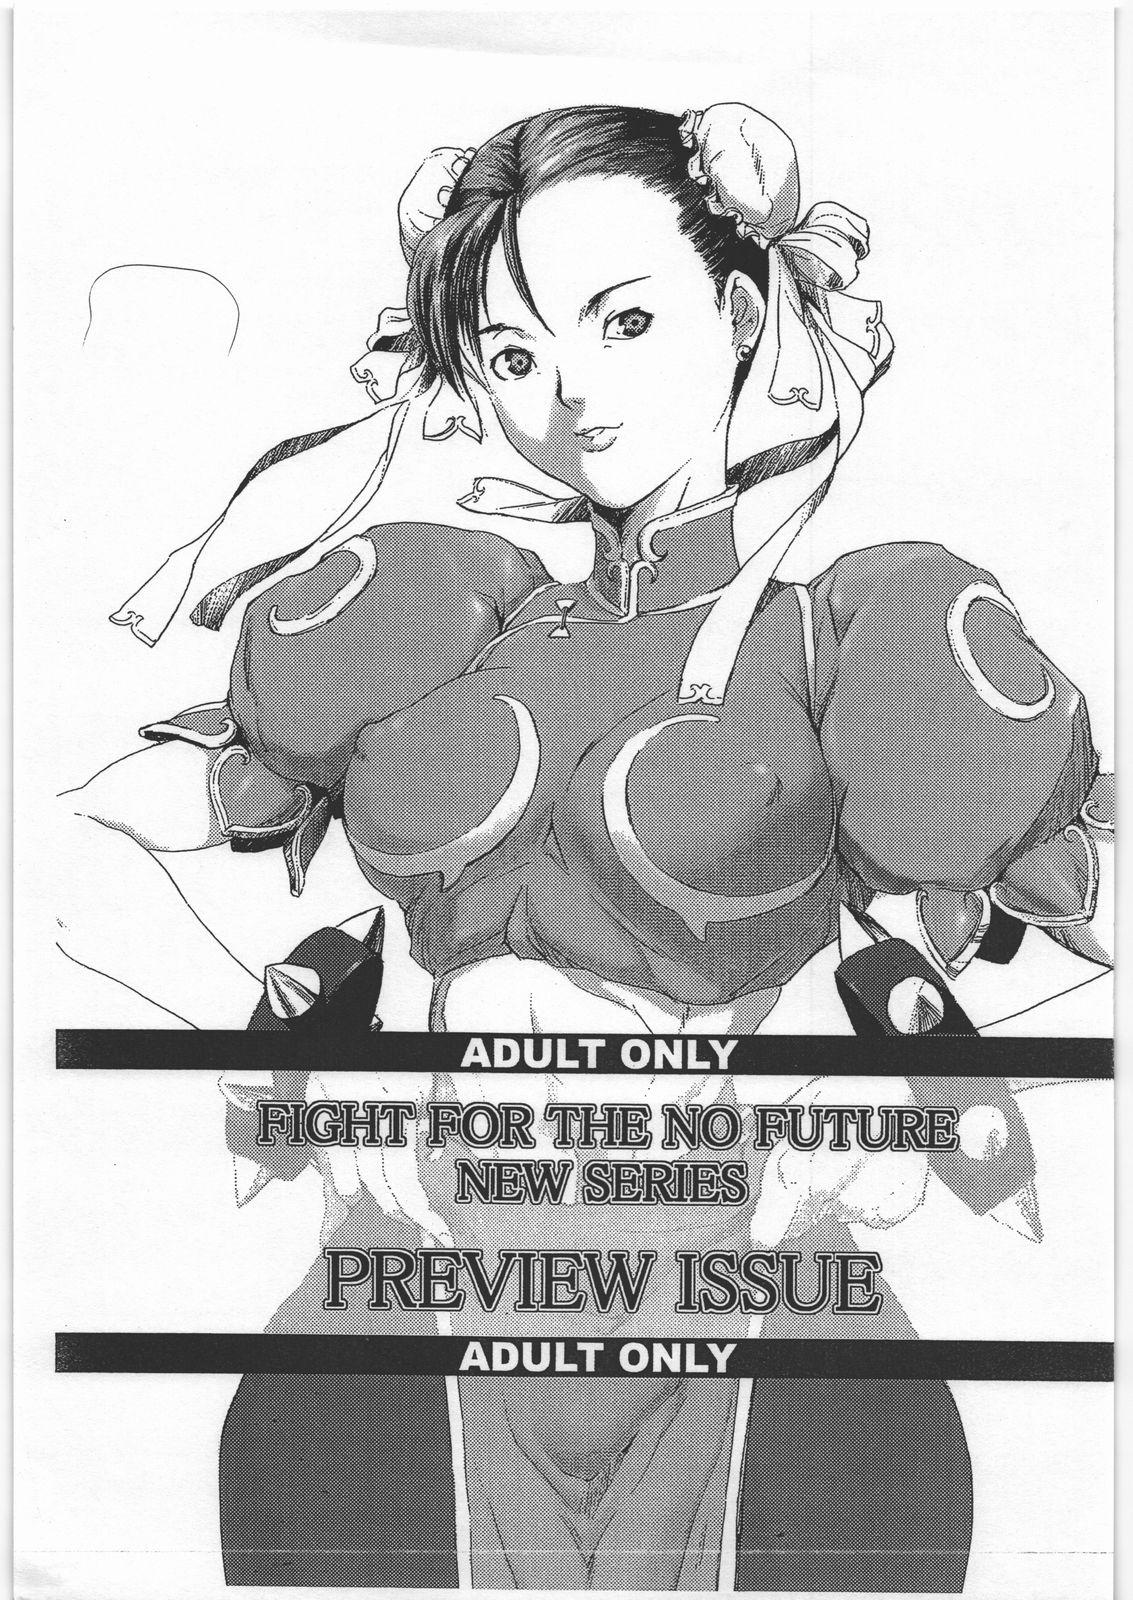 Mom FIGHT FOR THE NO FUTURE NEW SERIES PREVIEW - Street fighter Barely 18 Porn - Page 1